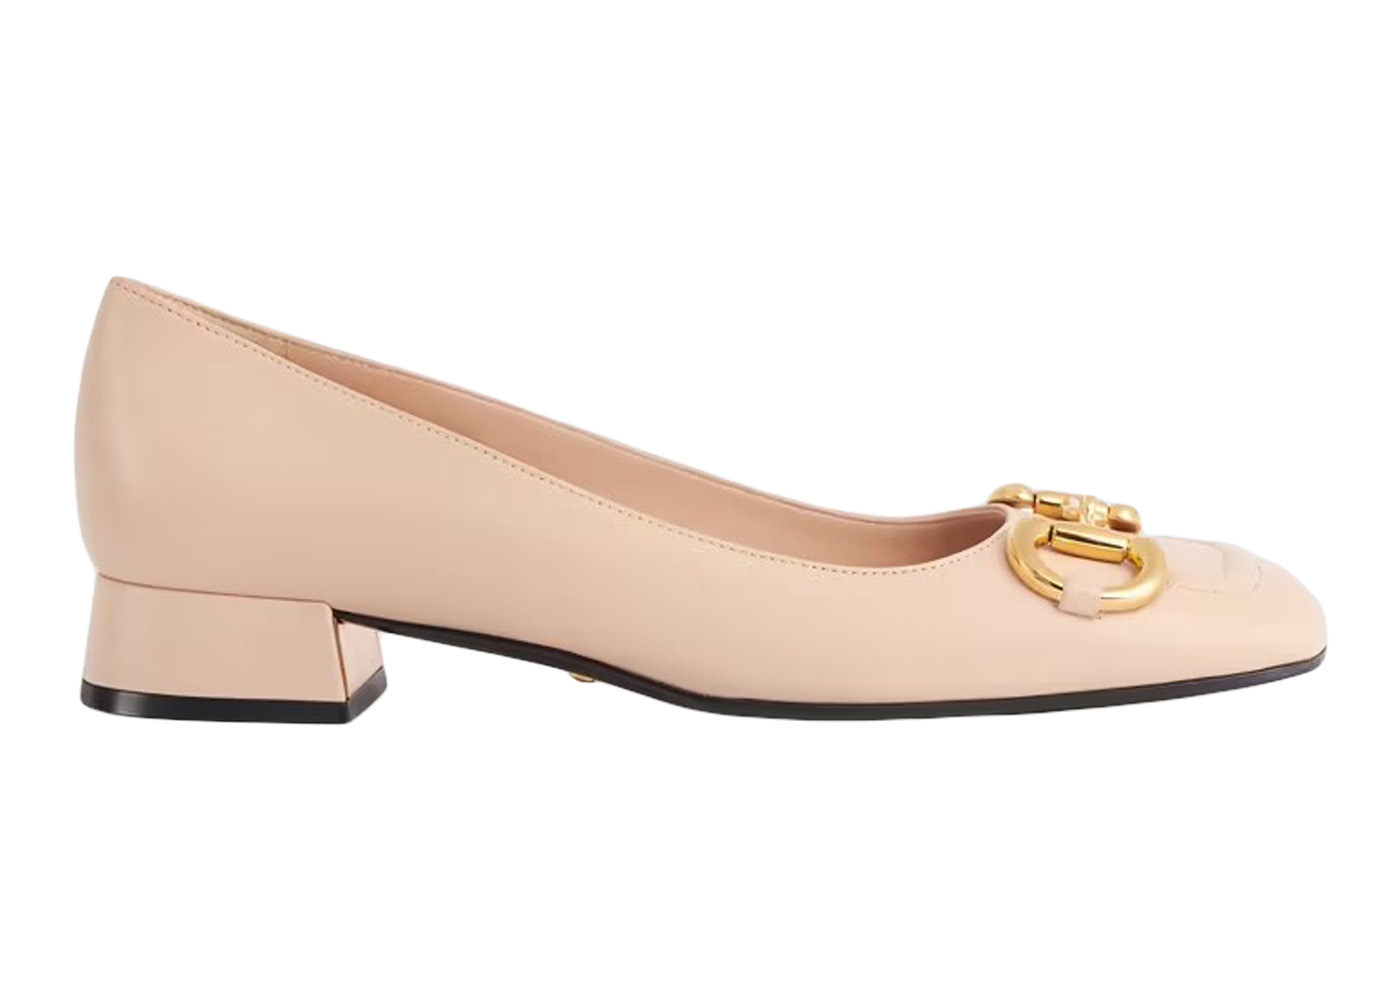 Gucci Double G Ballet Flats Pink Leather (Women's)